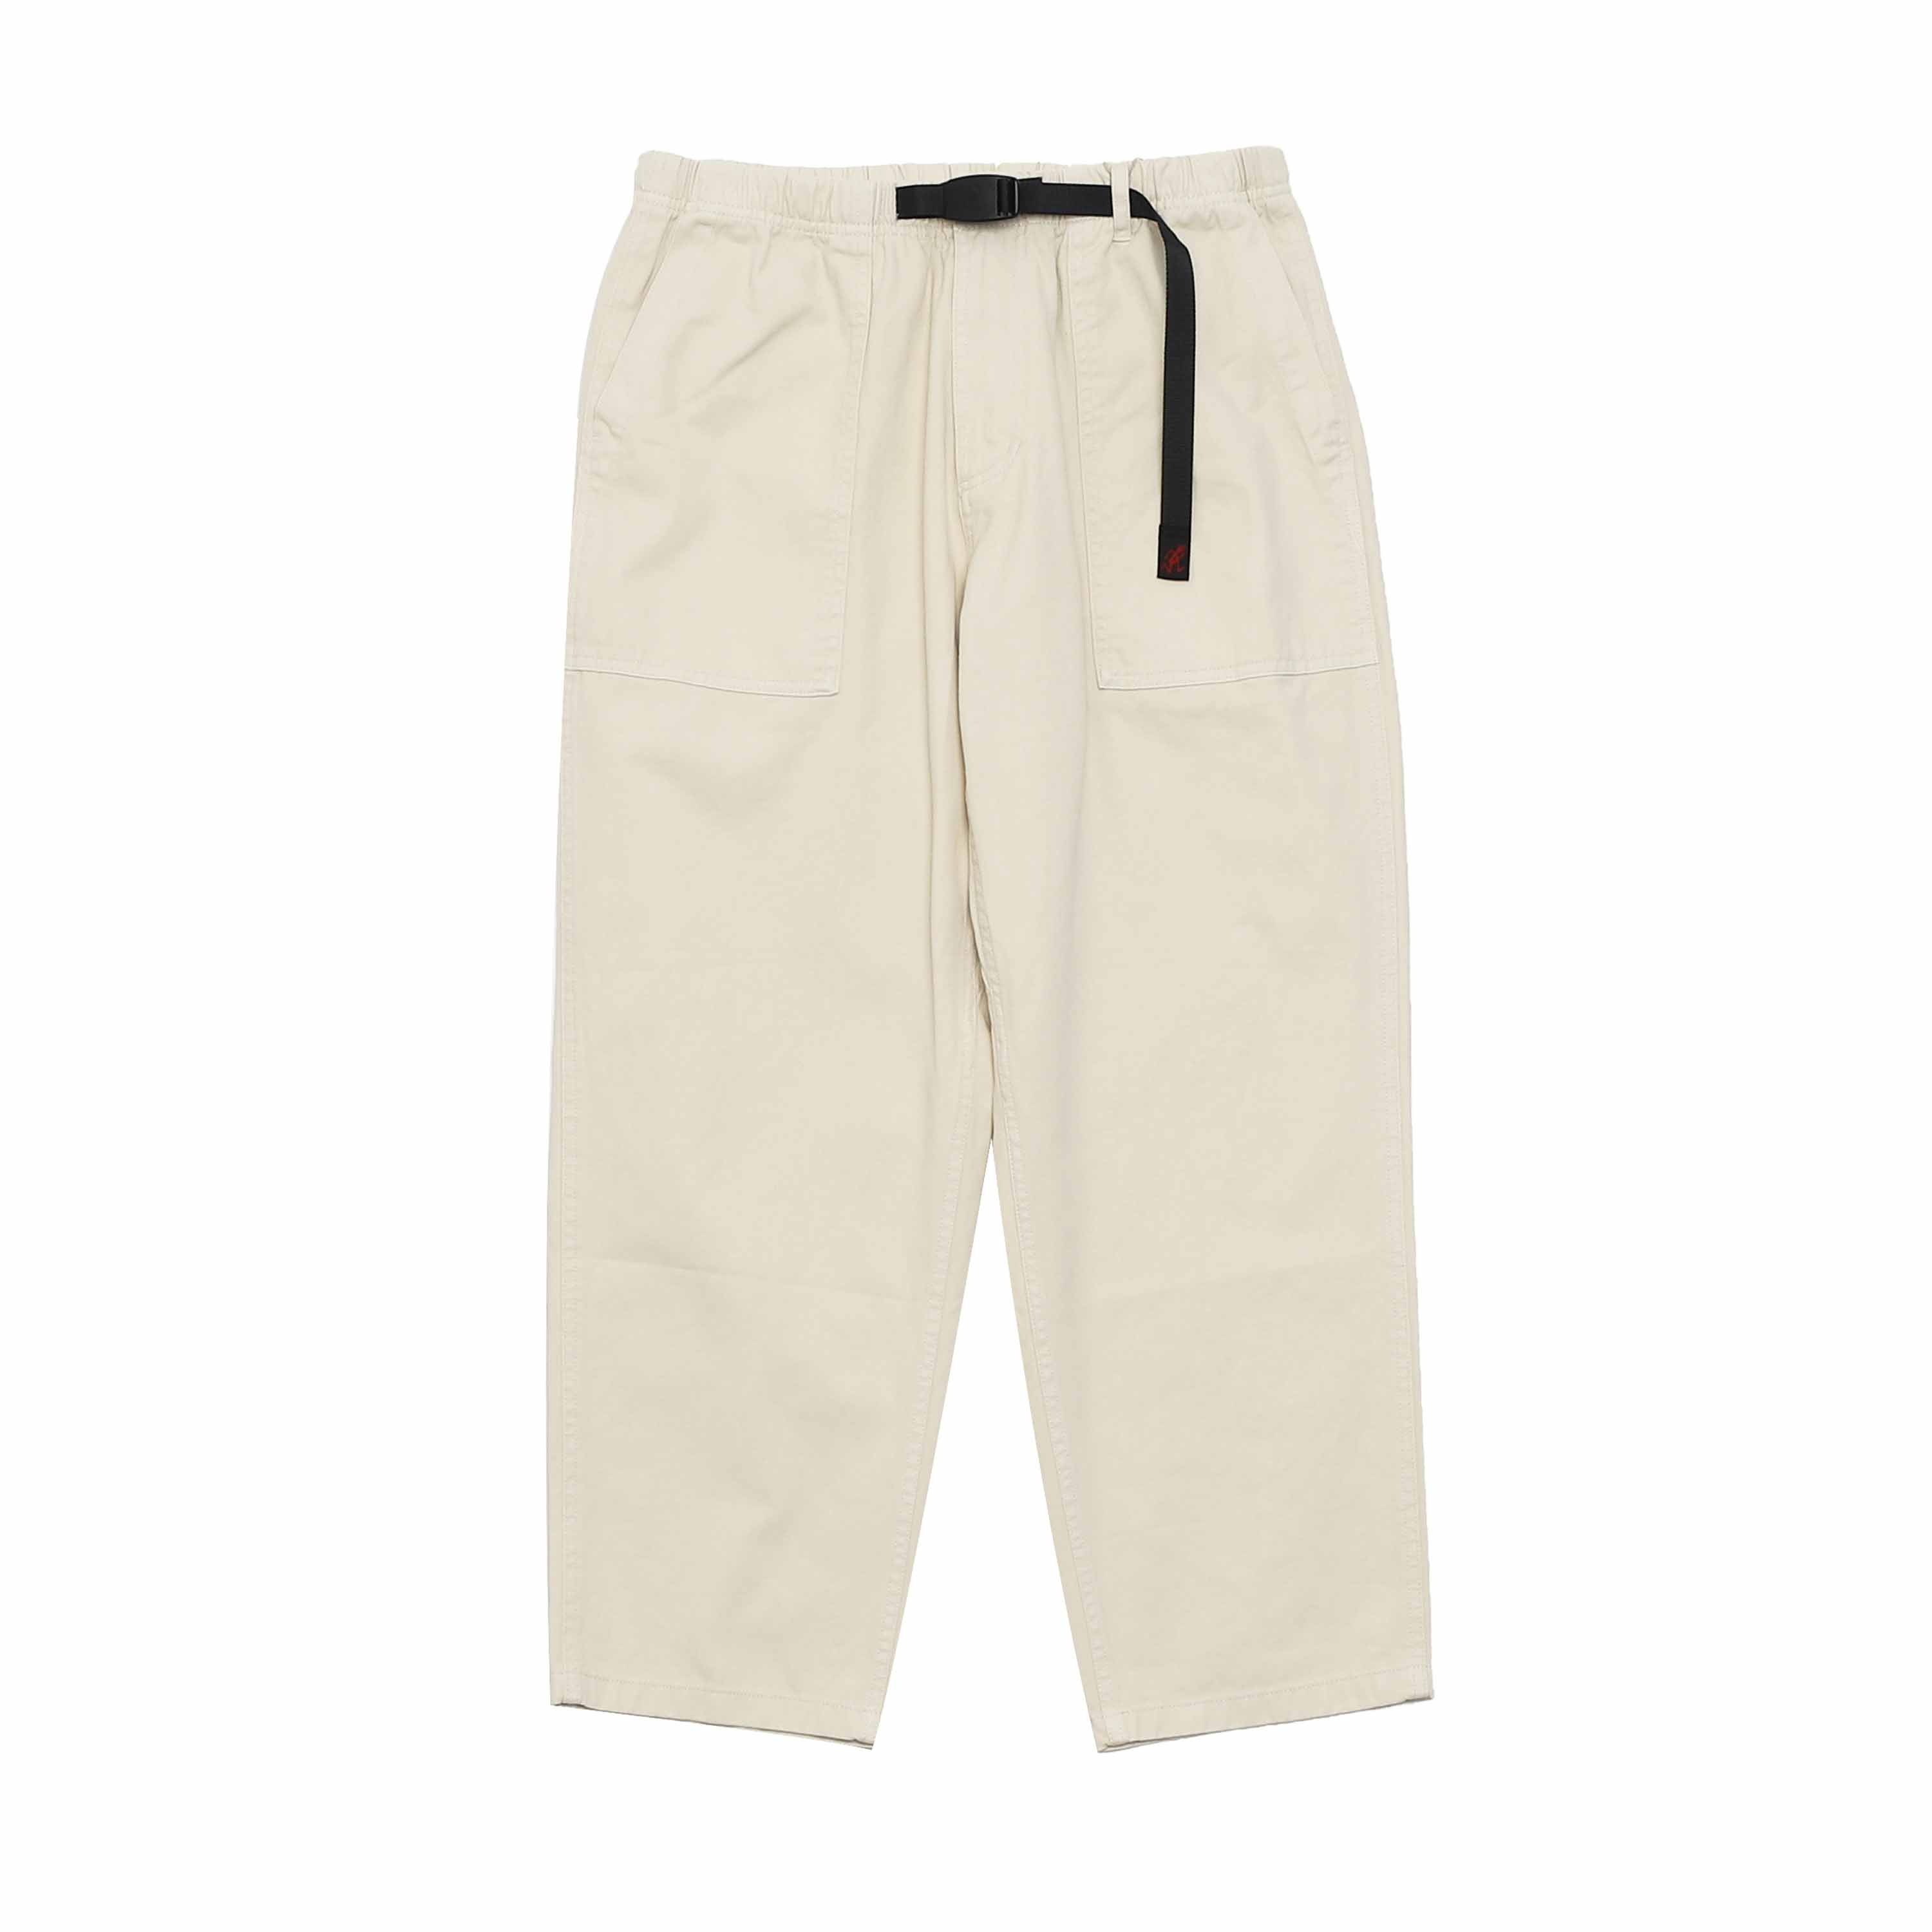 LOOSE TAPERED PANTS - GREGE